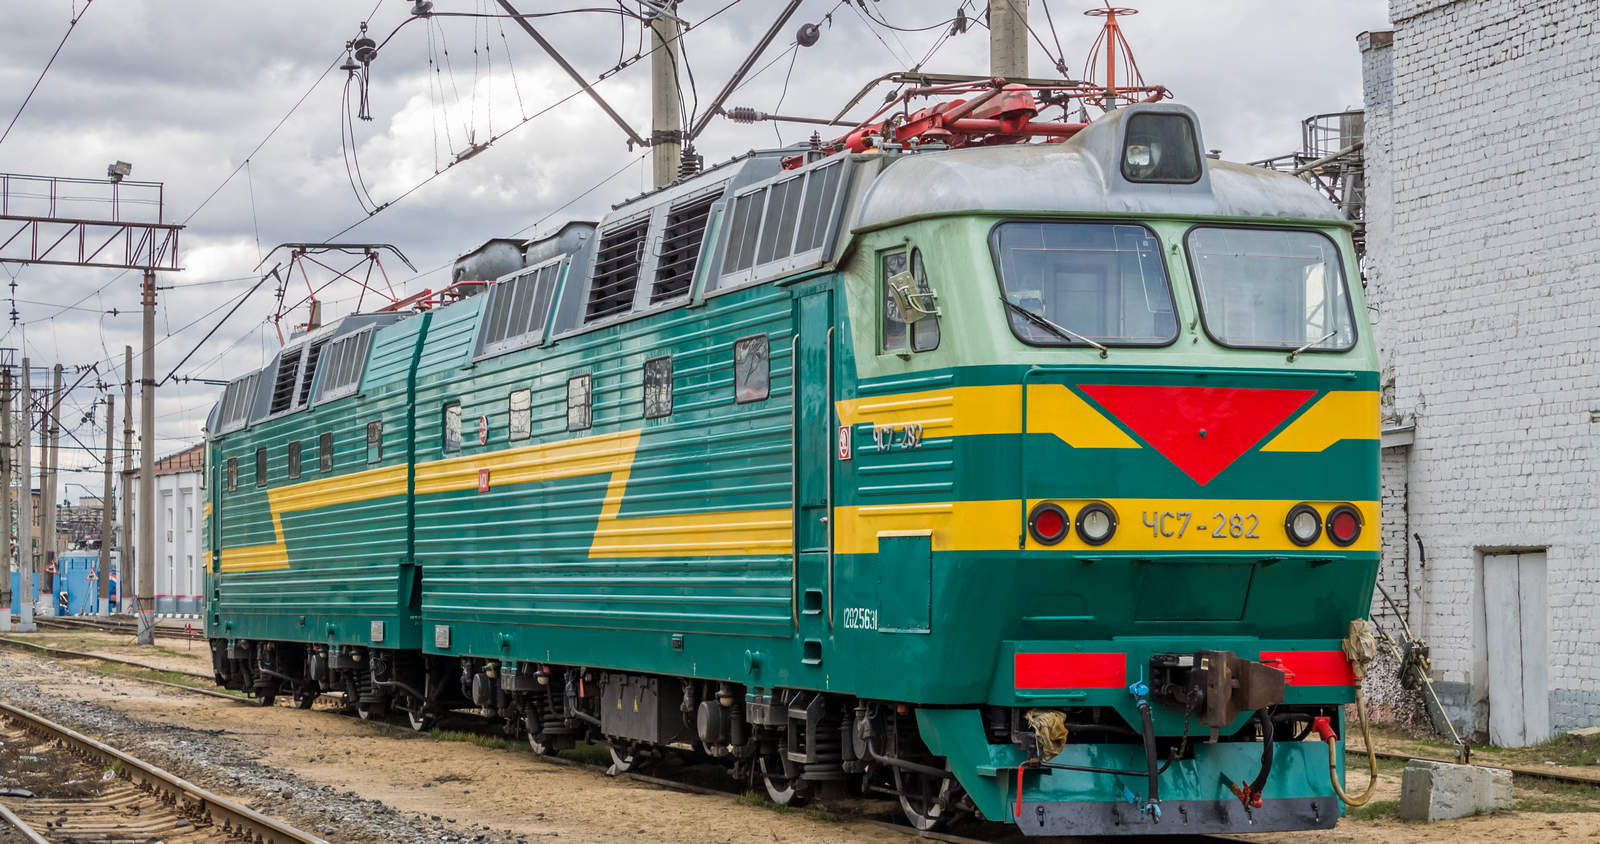 ЧС7-282 in April 2015 at Kursk Railway Station, Moscow